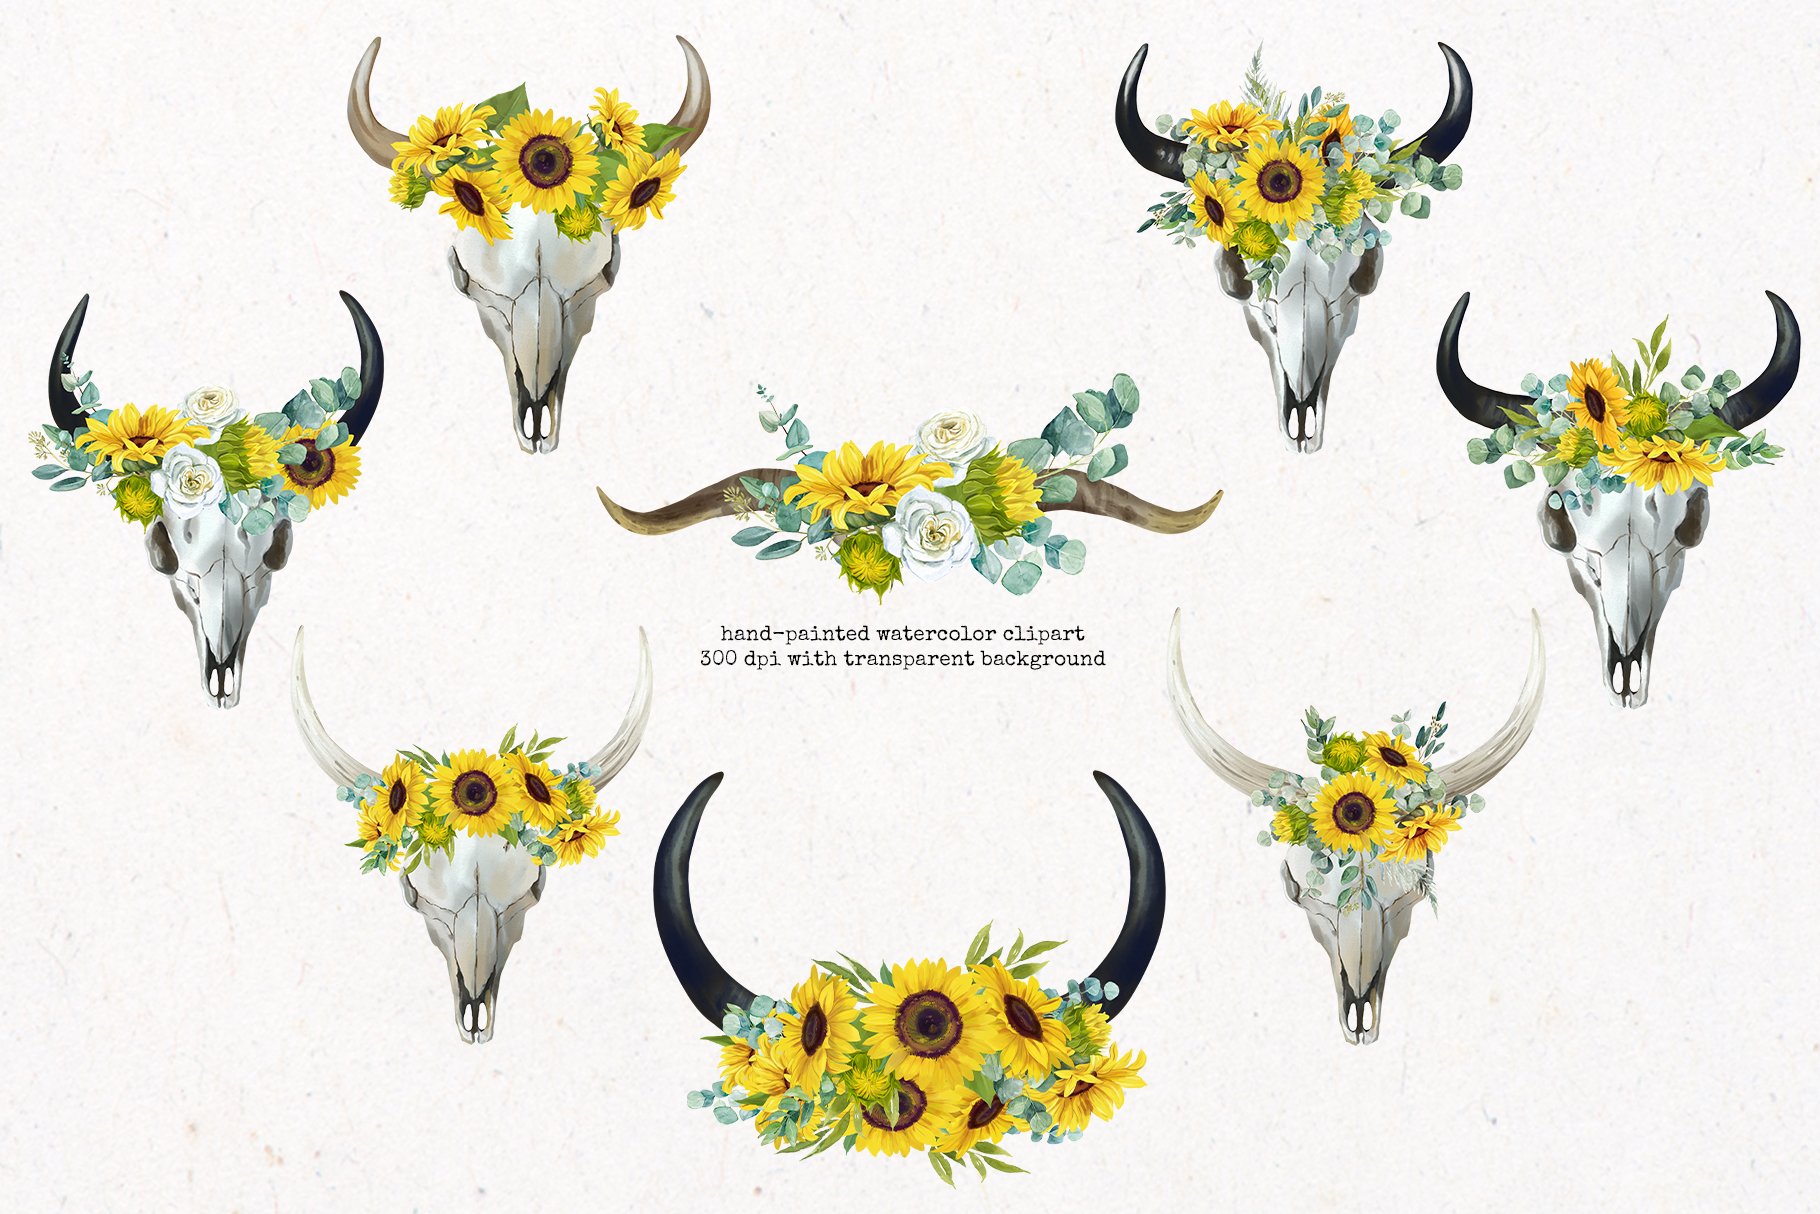 Boho Bull Skull with Sunflowers preview image.